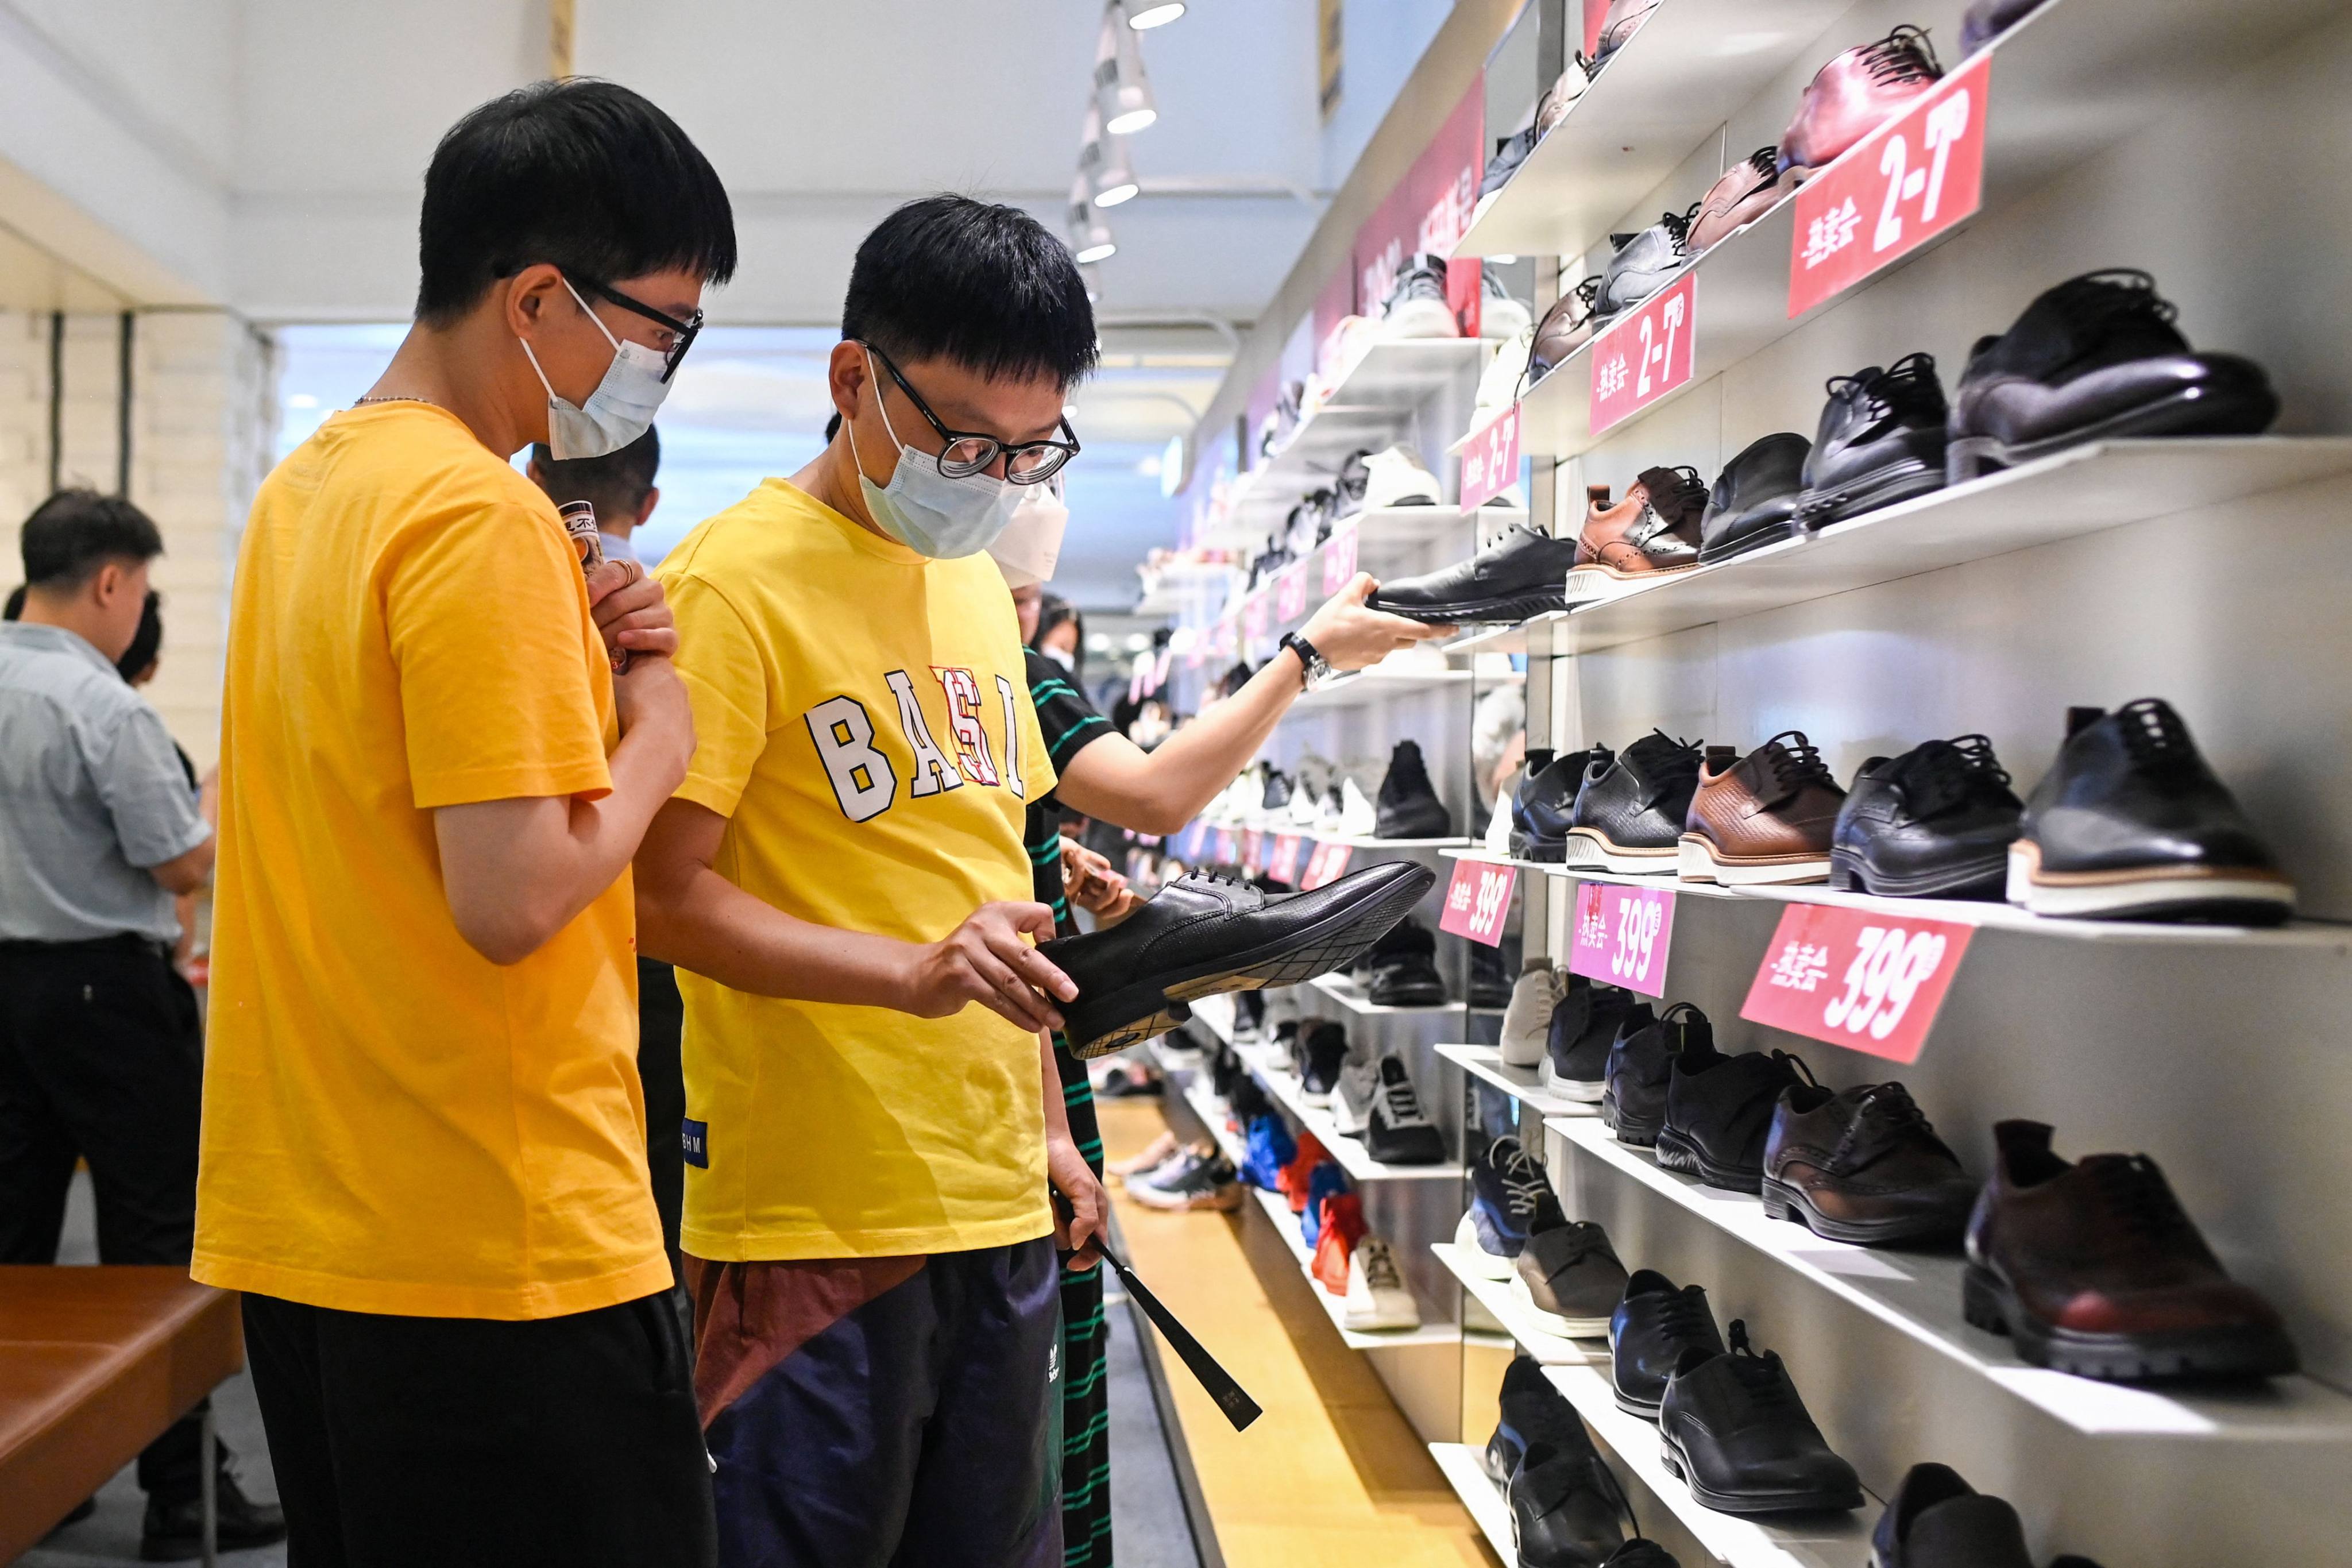 Shoppers look at shoes in a Beijing mall on June 15. Analysts are concerned about an uneven economic recovery in China, with consumer confidence taking a hit from income and job uncertainties. Photo: AFP